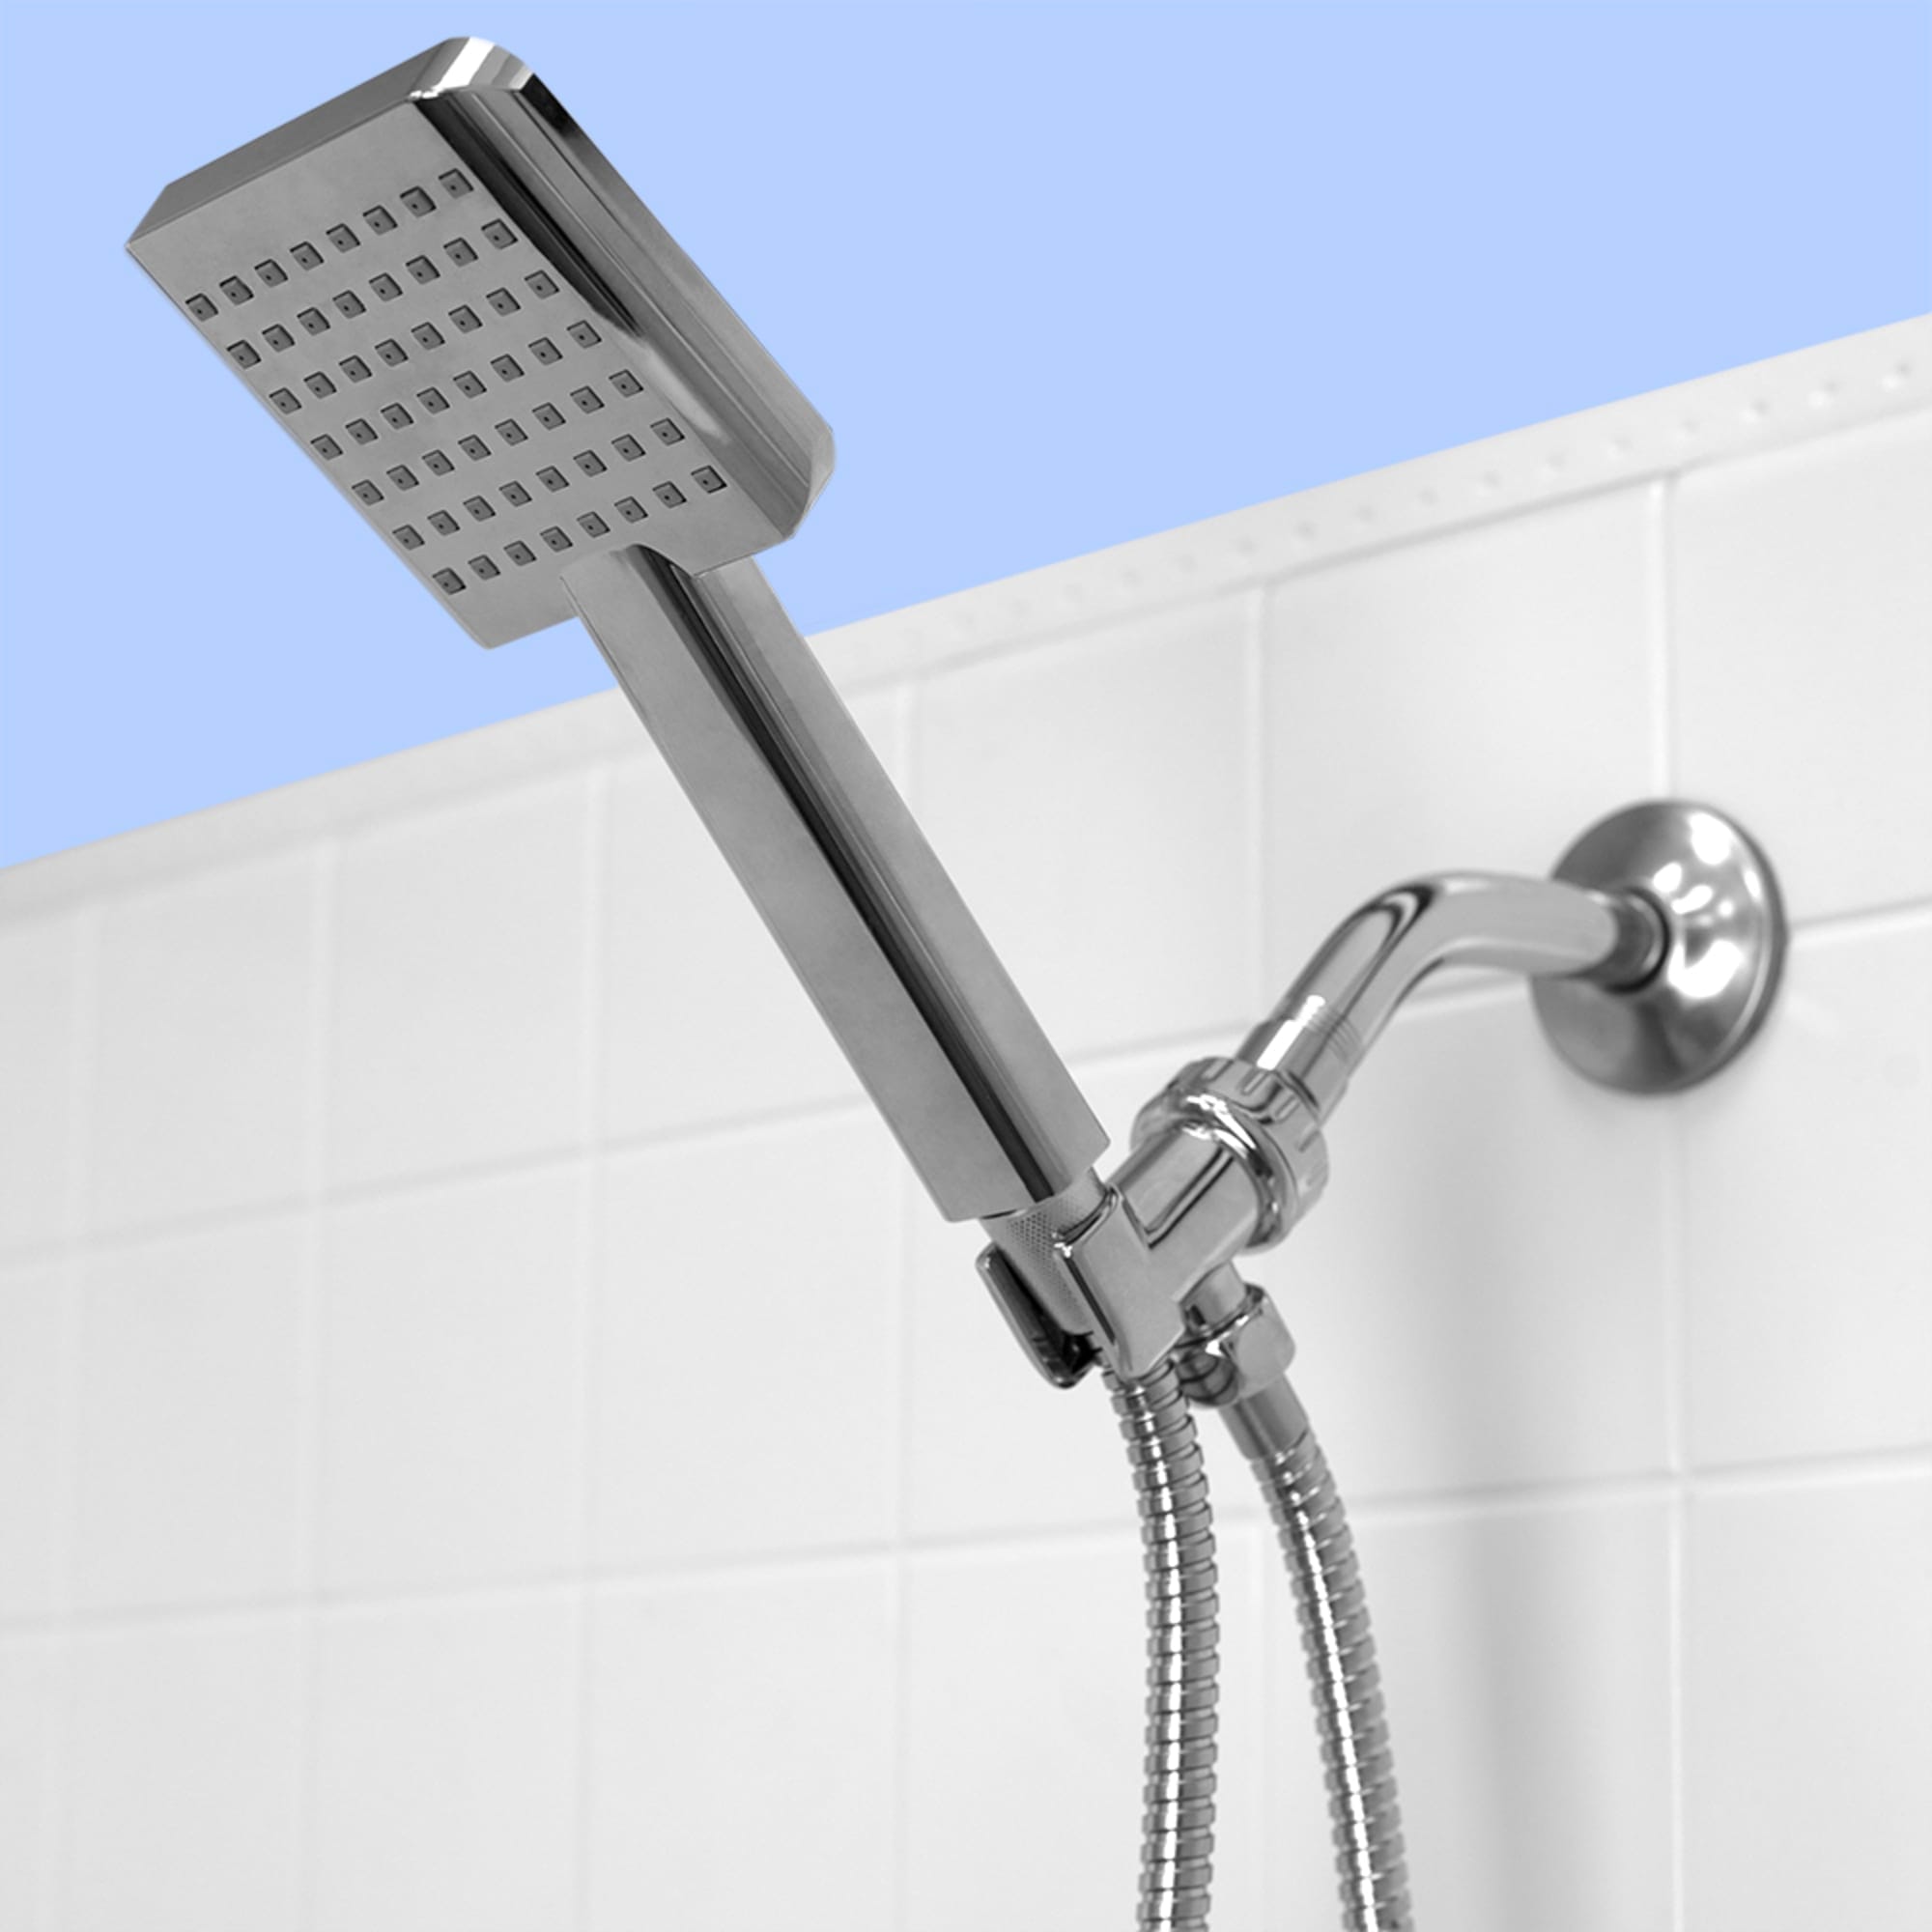 Home Basics Ultimate ShowerBliss Square Handheld Single Function Shower Massager, Chome $8.00 EACH, CASE PACK OF 12